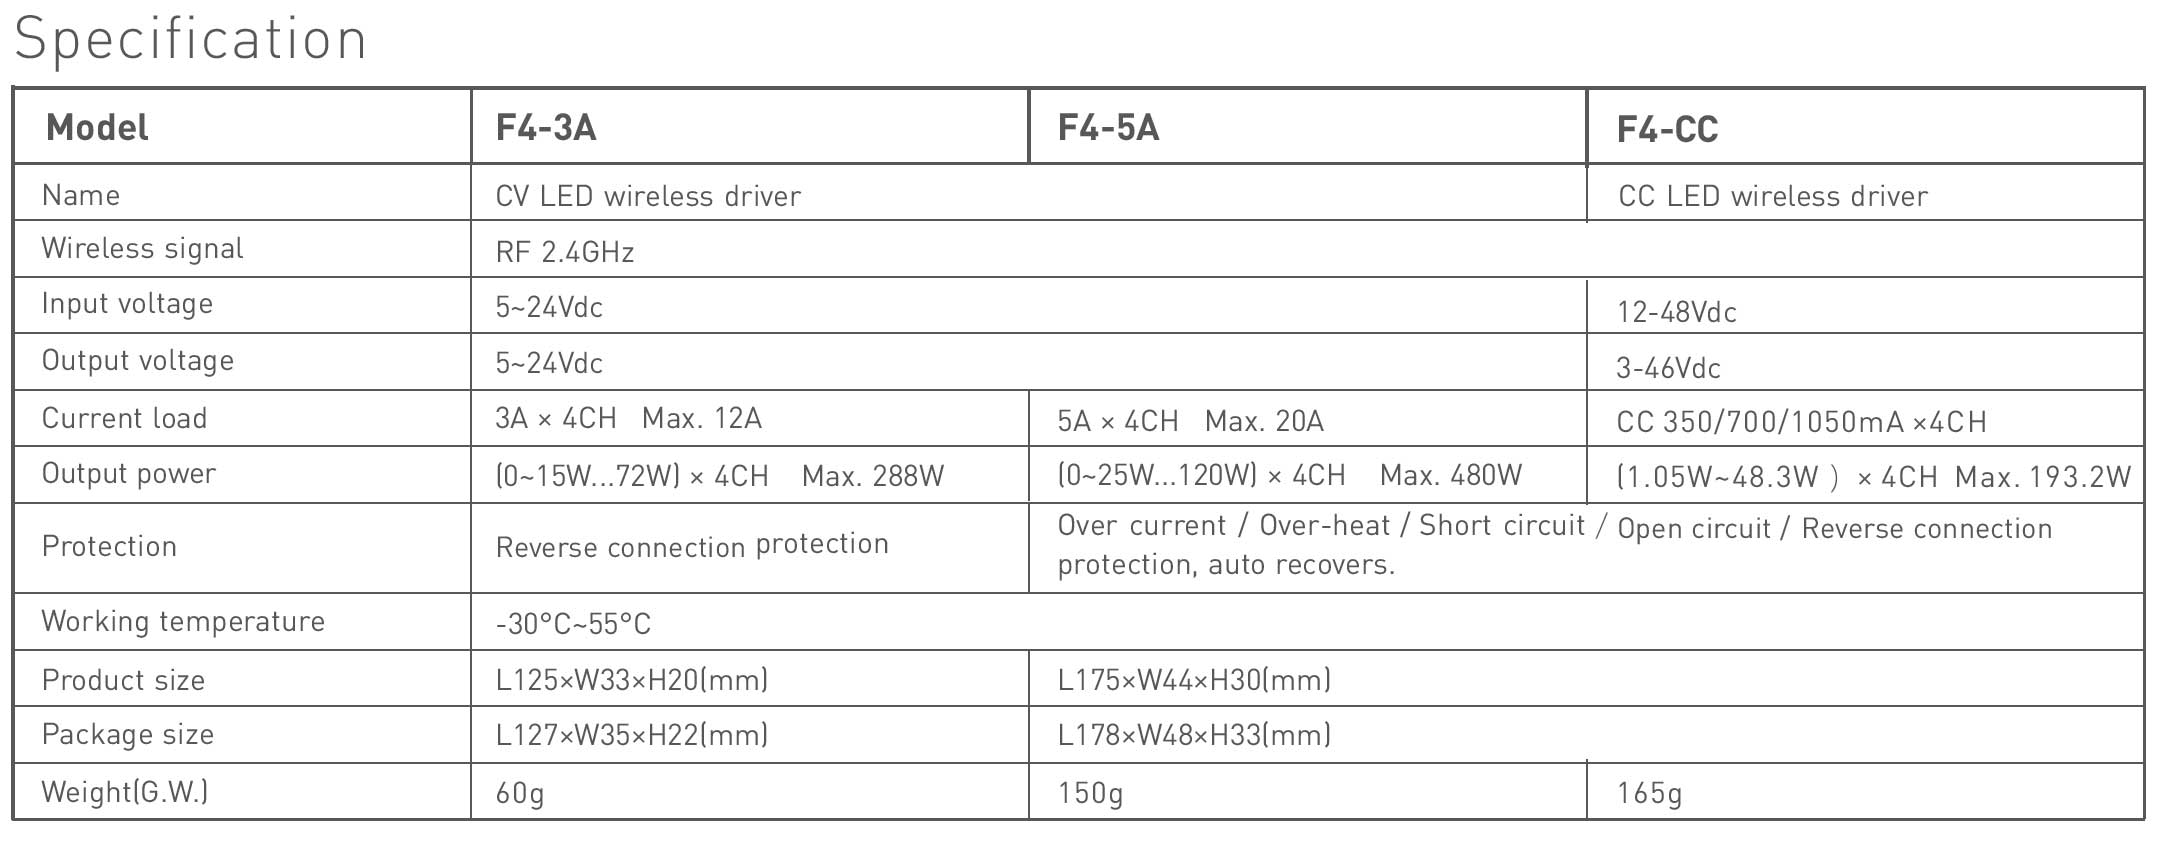 LTech L-BUS System Wireless Receiver F4-5A Specification